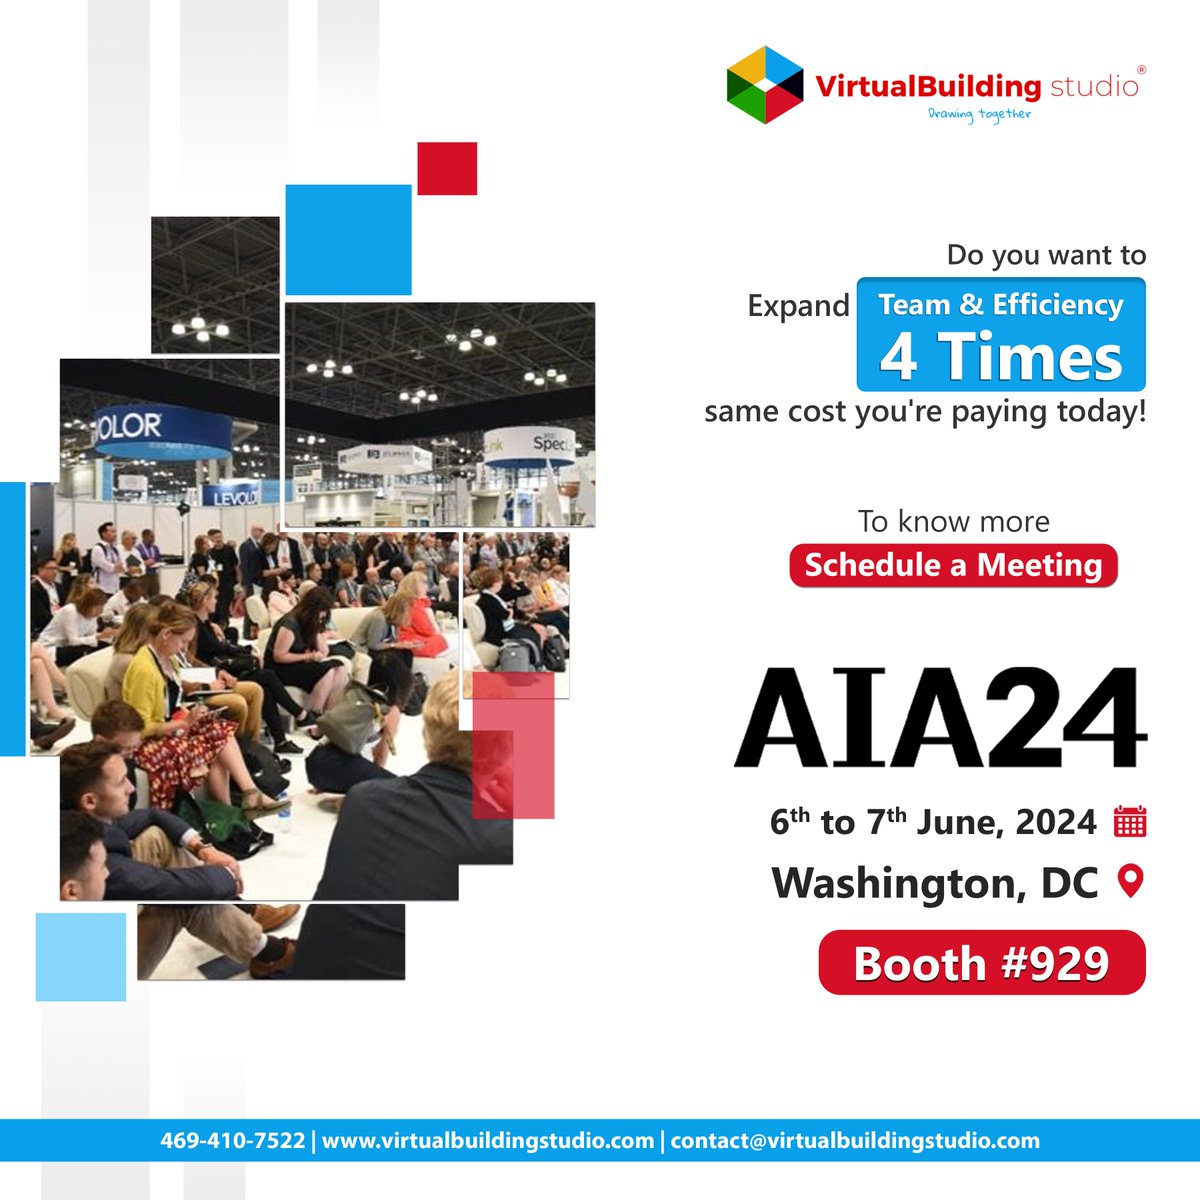 Ready to onboard Top 1% Architects and Engineers without breaking the bank?

Join us at AIA'24 at Booth #929 to know more.

Schedule a Meeting - bit.ly/3Uvju0F

#AIA #AIAExpo #AIA2024 #USA #Event #Architecture #Design